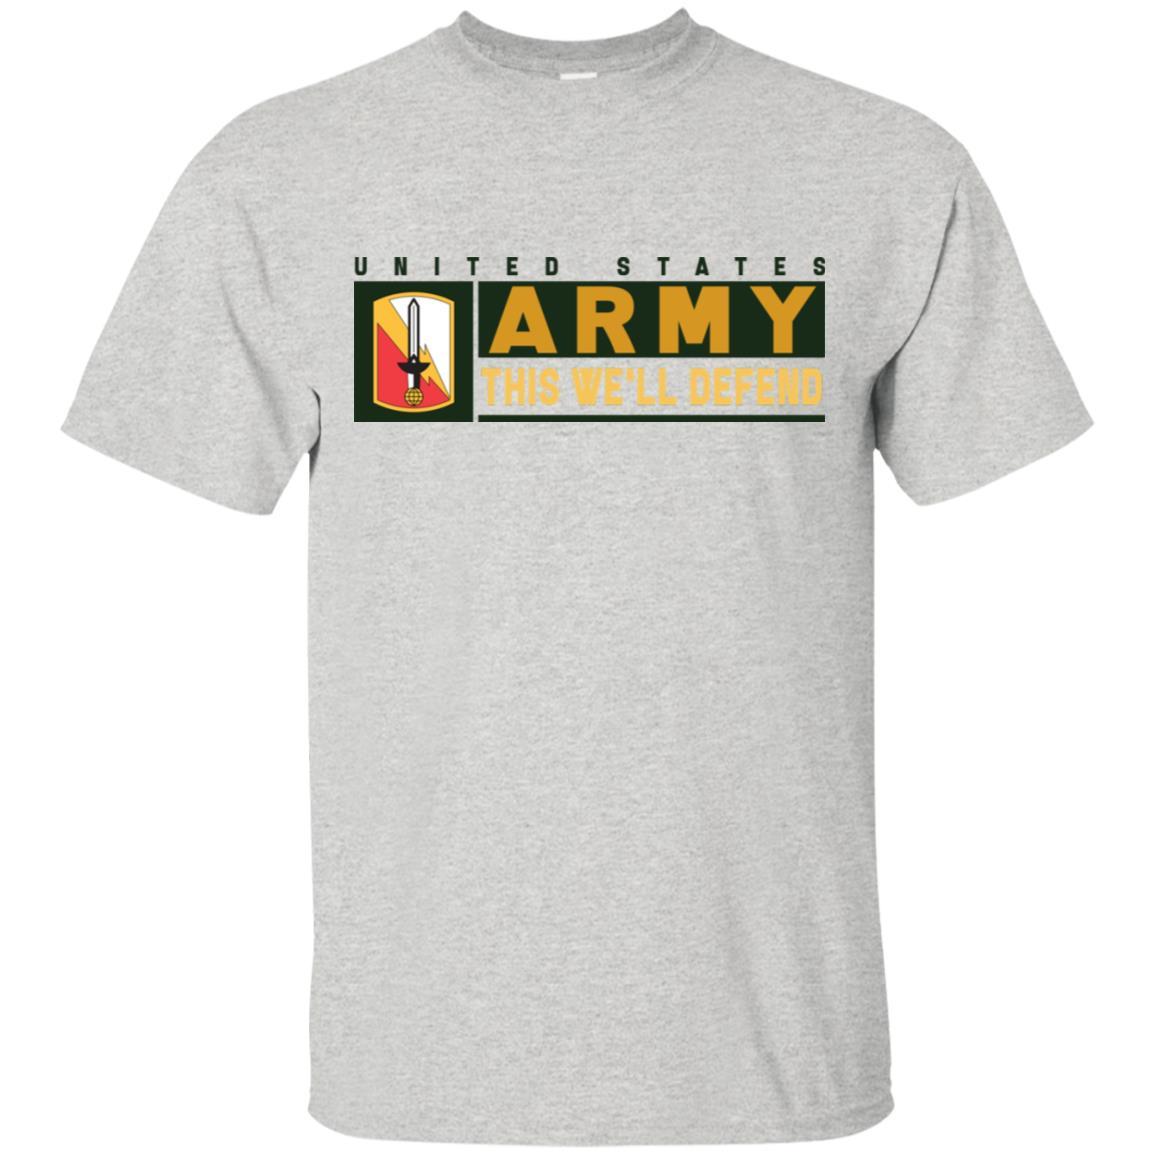 US Army 21ST SIGNAL BRIGADE- This We'll Defend T-Shirt On Front For Men-TShirt-Army-Veterans Nation